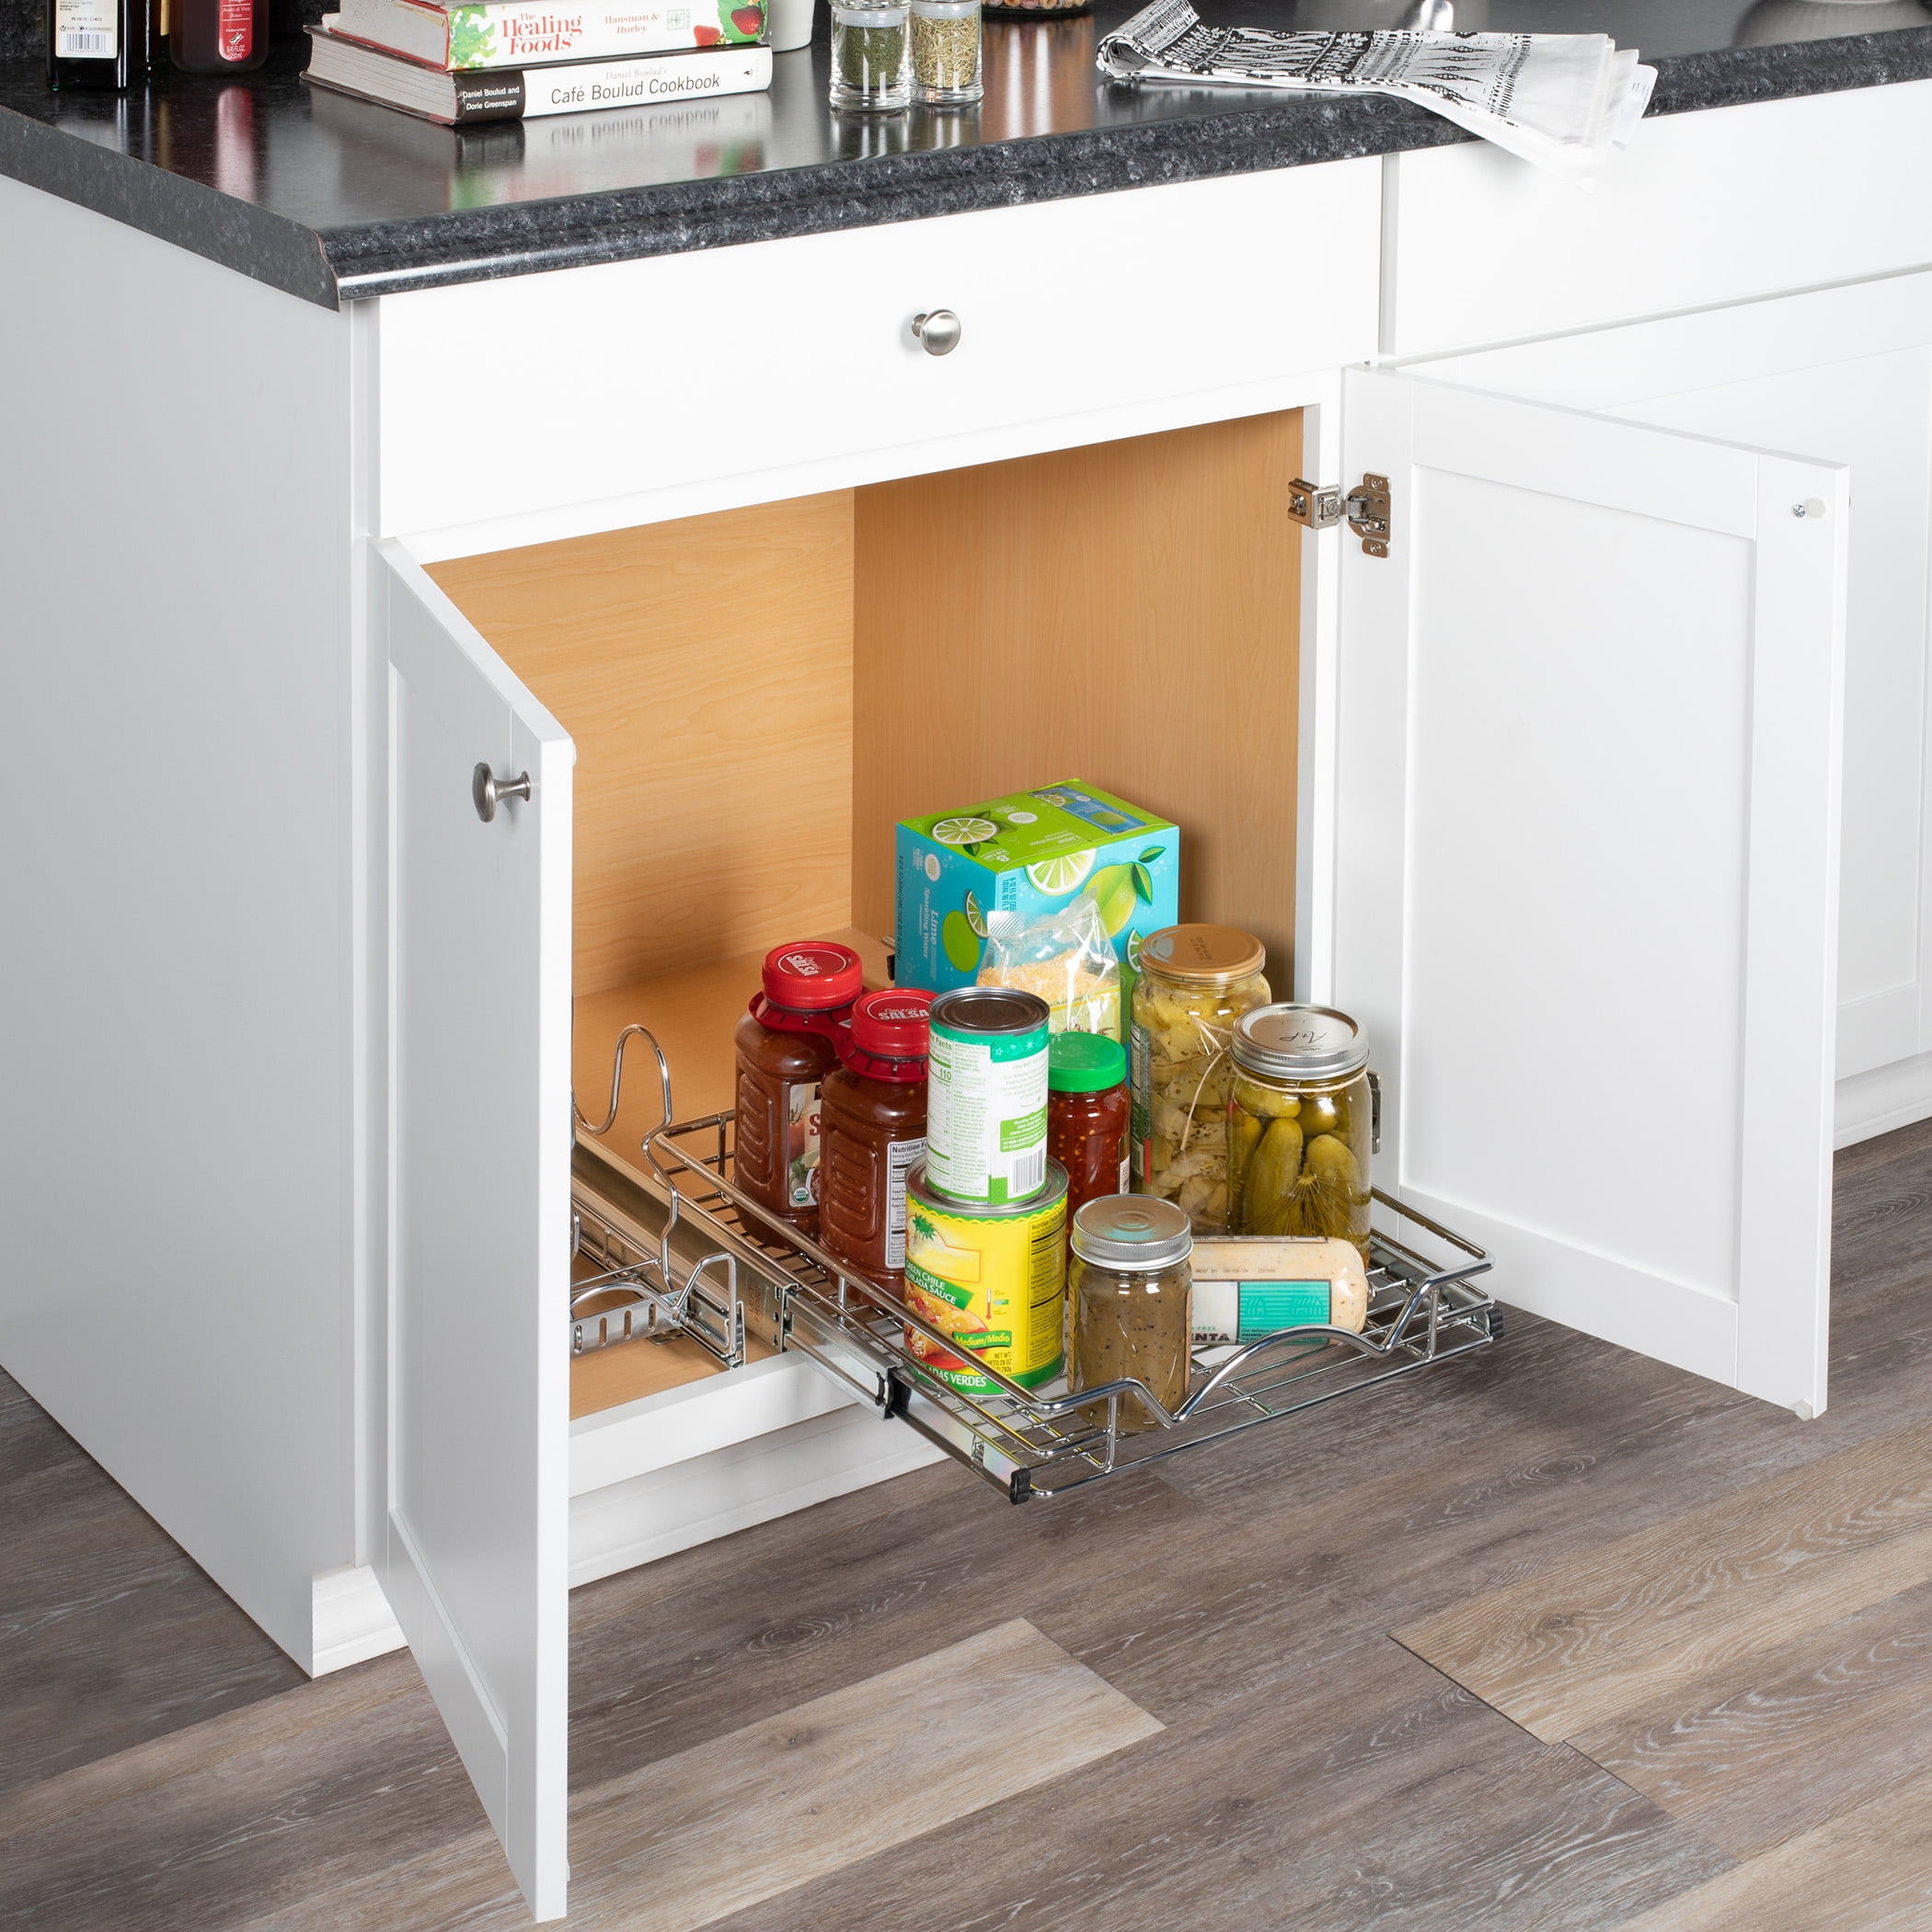 How to Install Cabinet Pull-Out Drawers—the Key to More Kitchen Storage